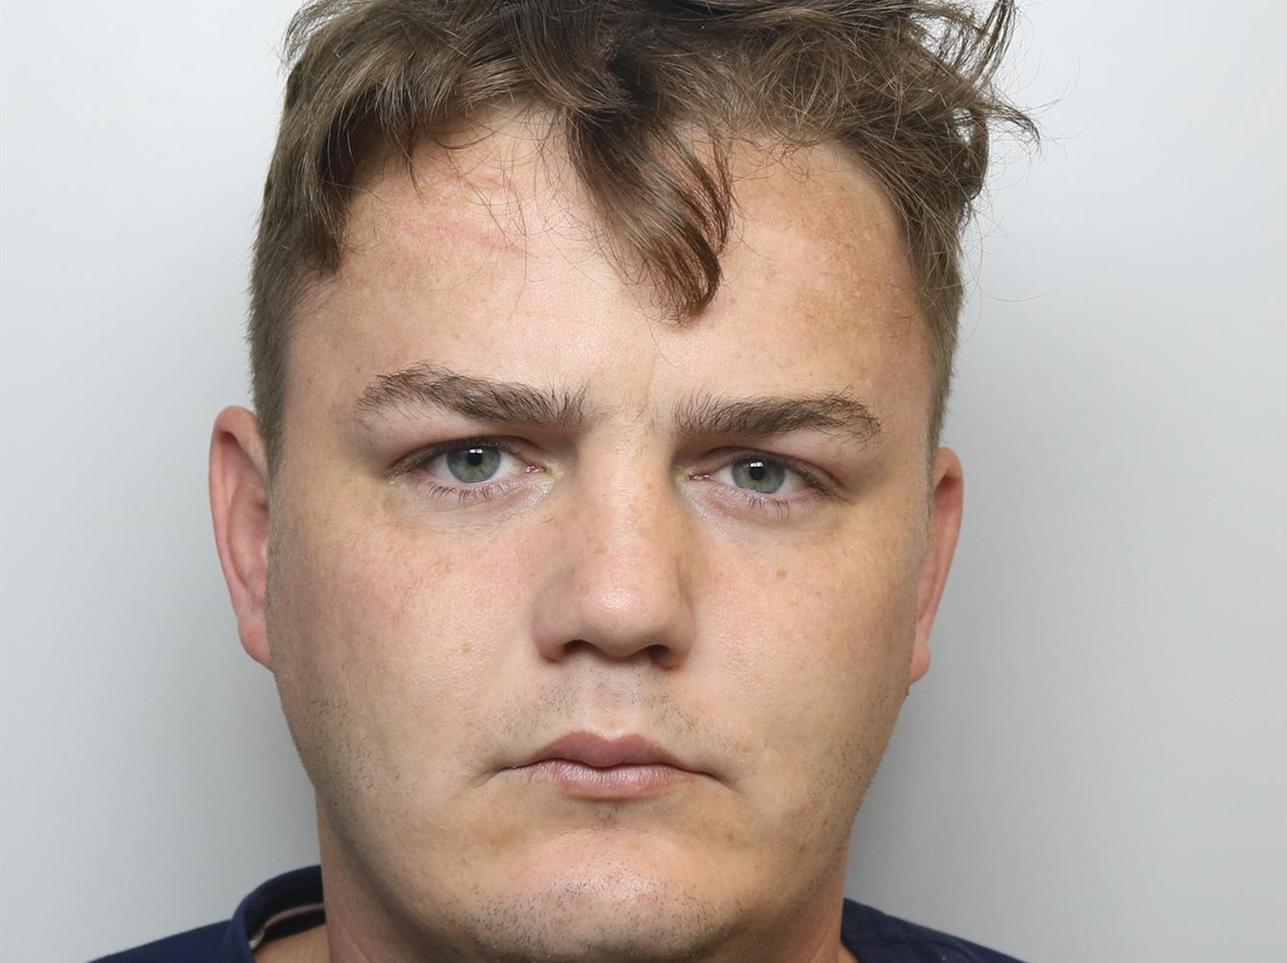 Ringleader John Kitchen played a leading role in the theft of 1.5m of goods from lorries and took part in the dramatic ram-raid at a jewellers in Leeds. He was jailed for 15 years and eight months.